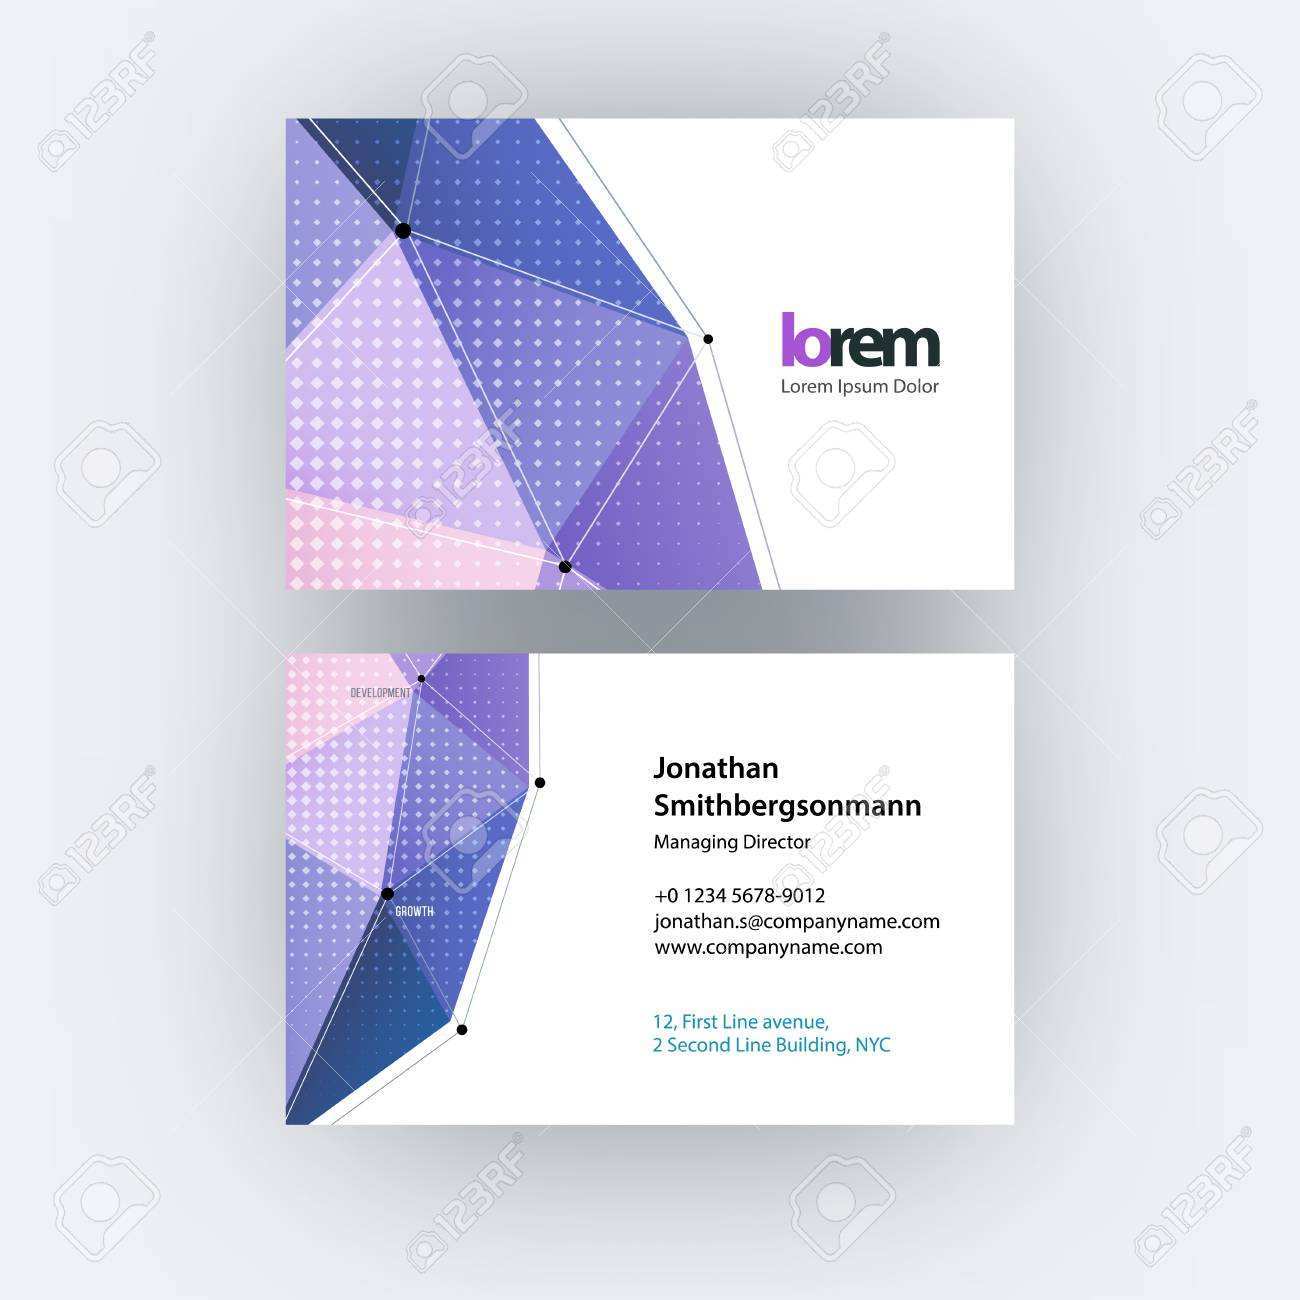 24 Customize Business Card Template Grid Download by Business Card Template Grid